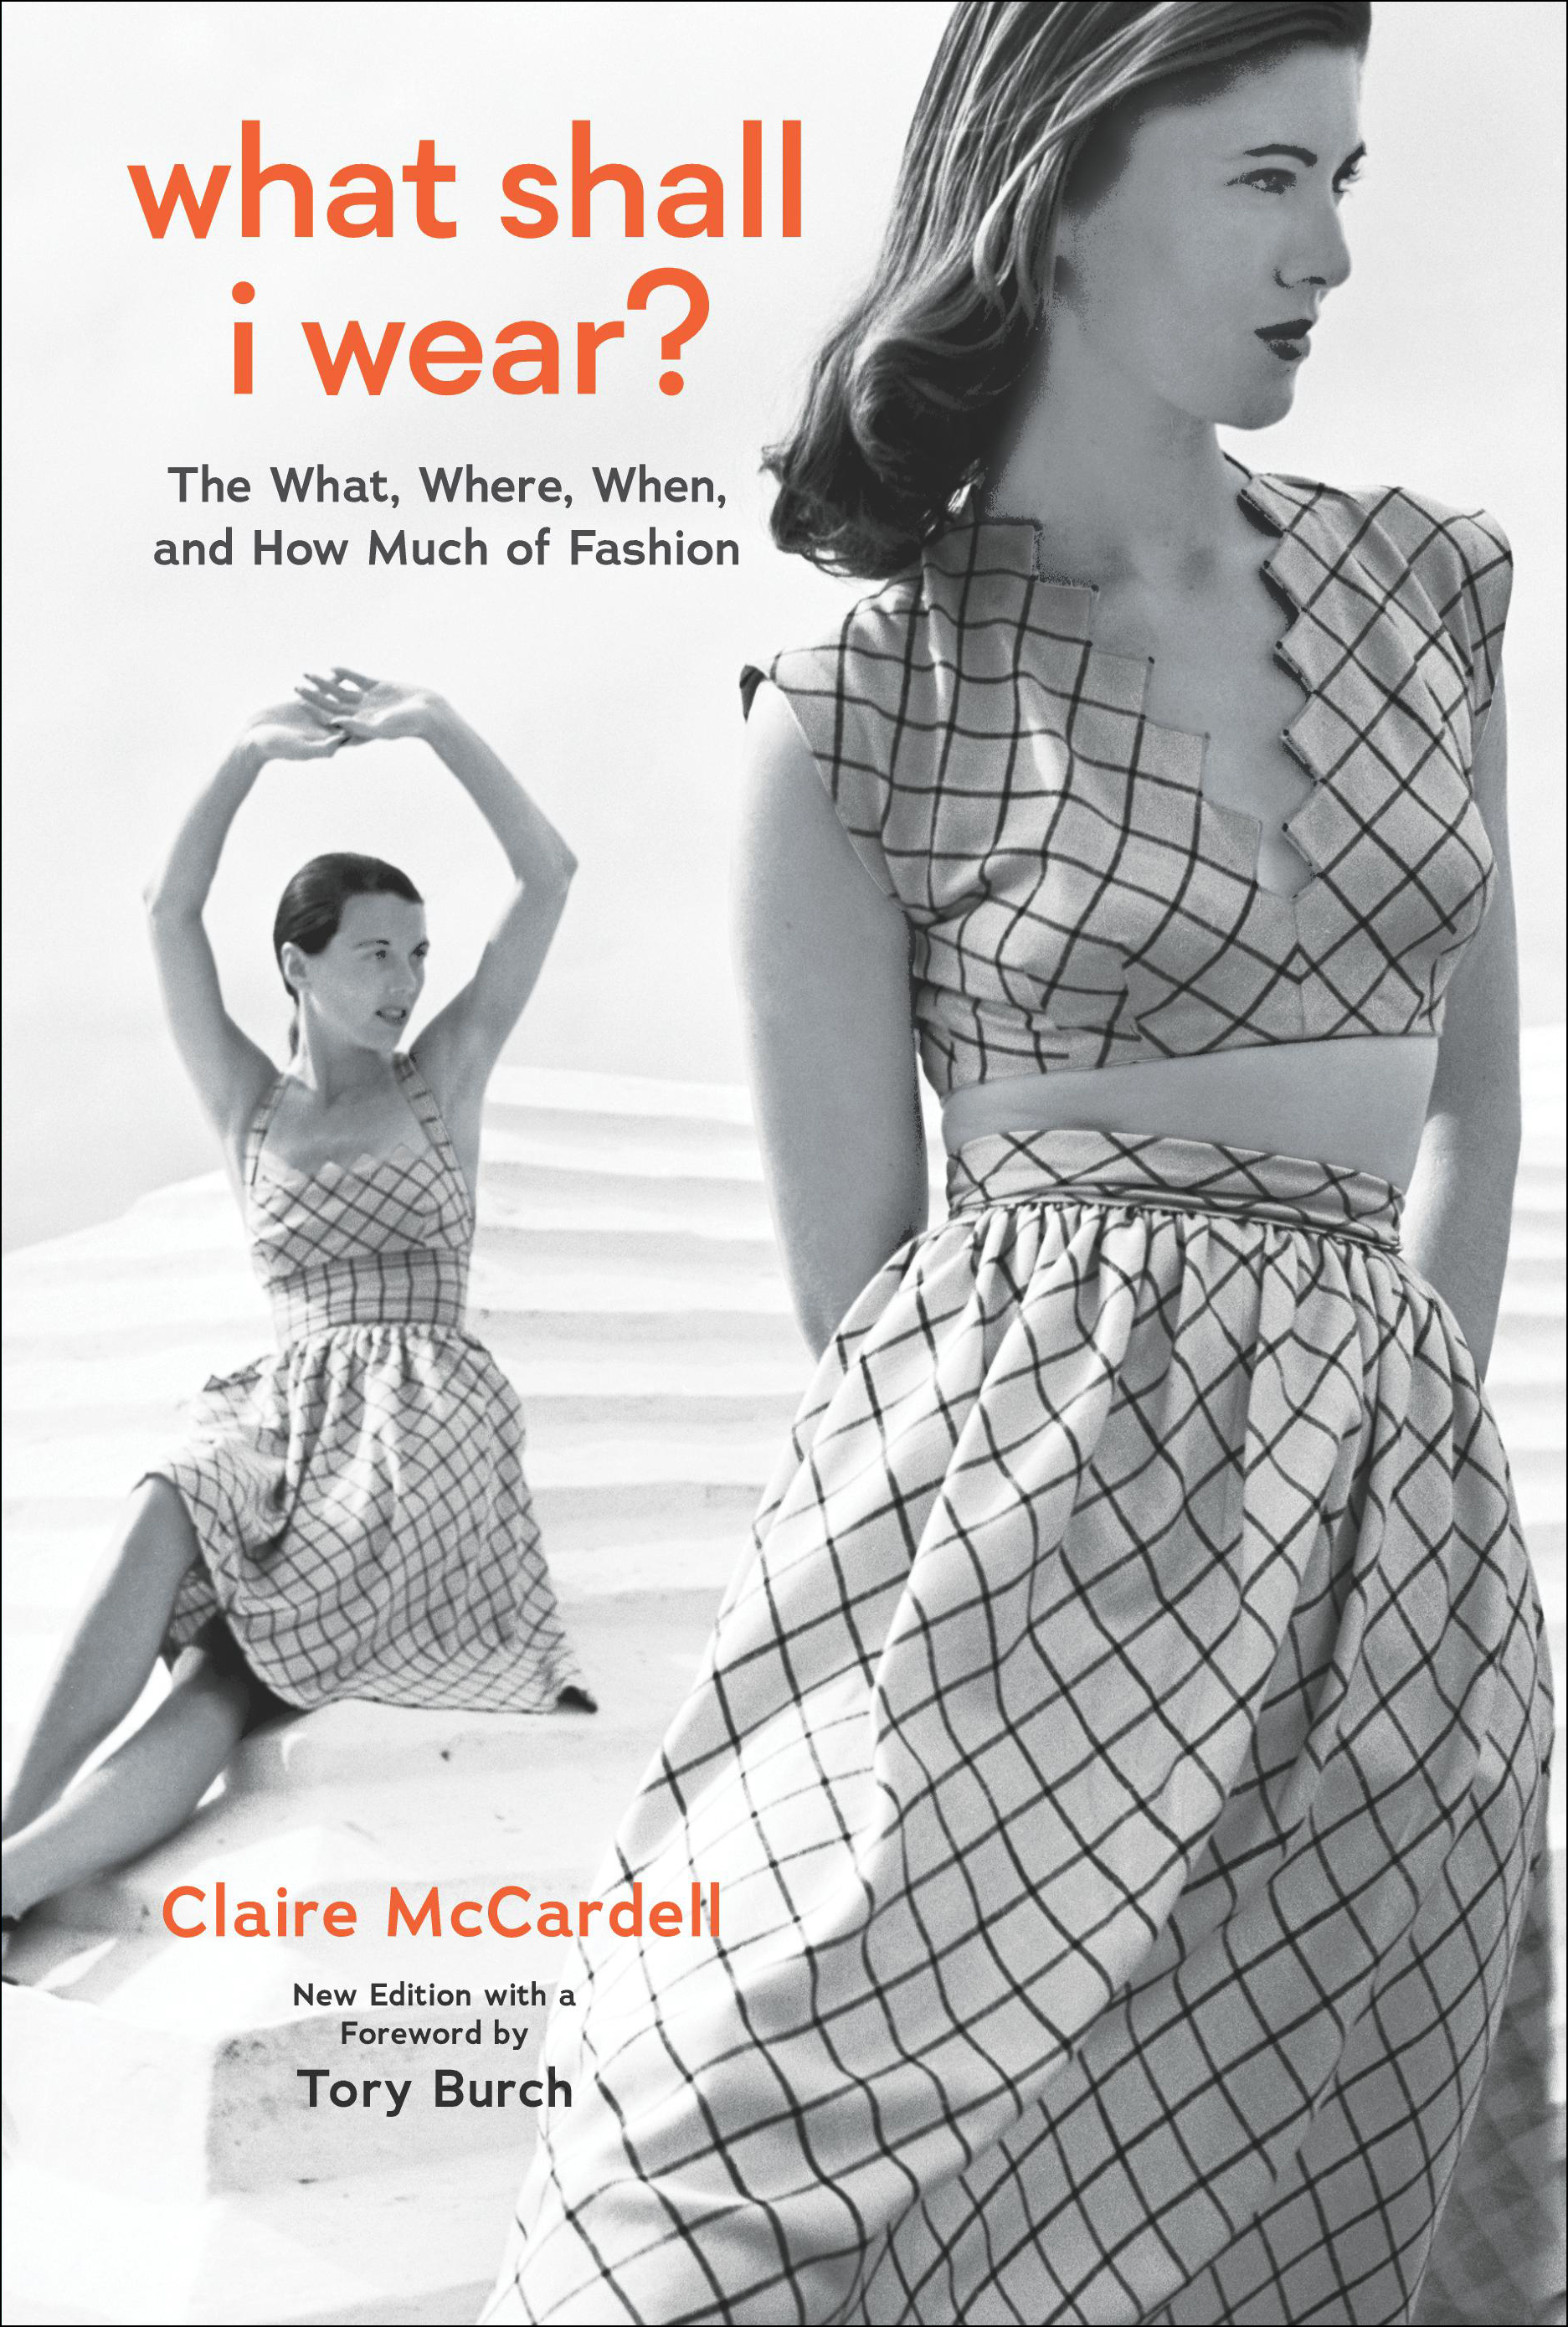 Tory Burch Pays Tribute to Claire McCardell in New Book | News | CFDA